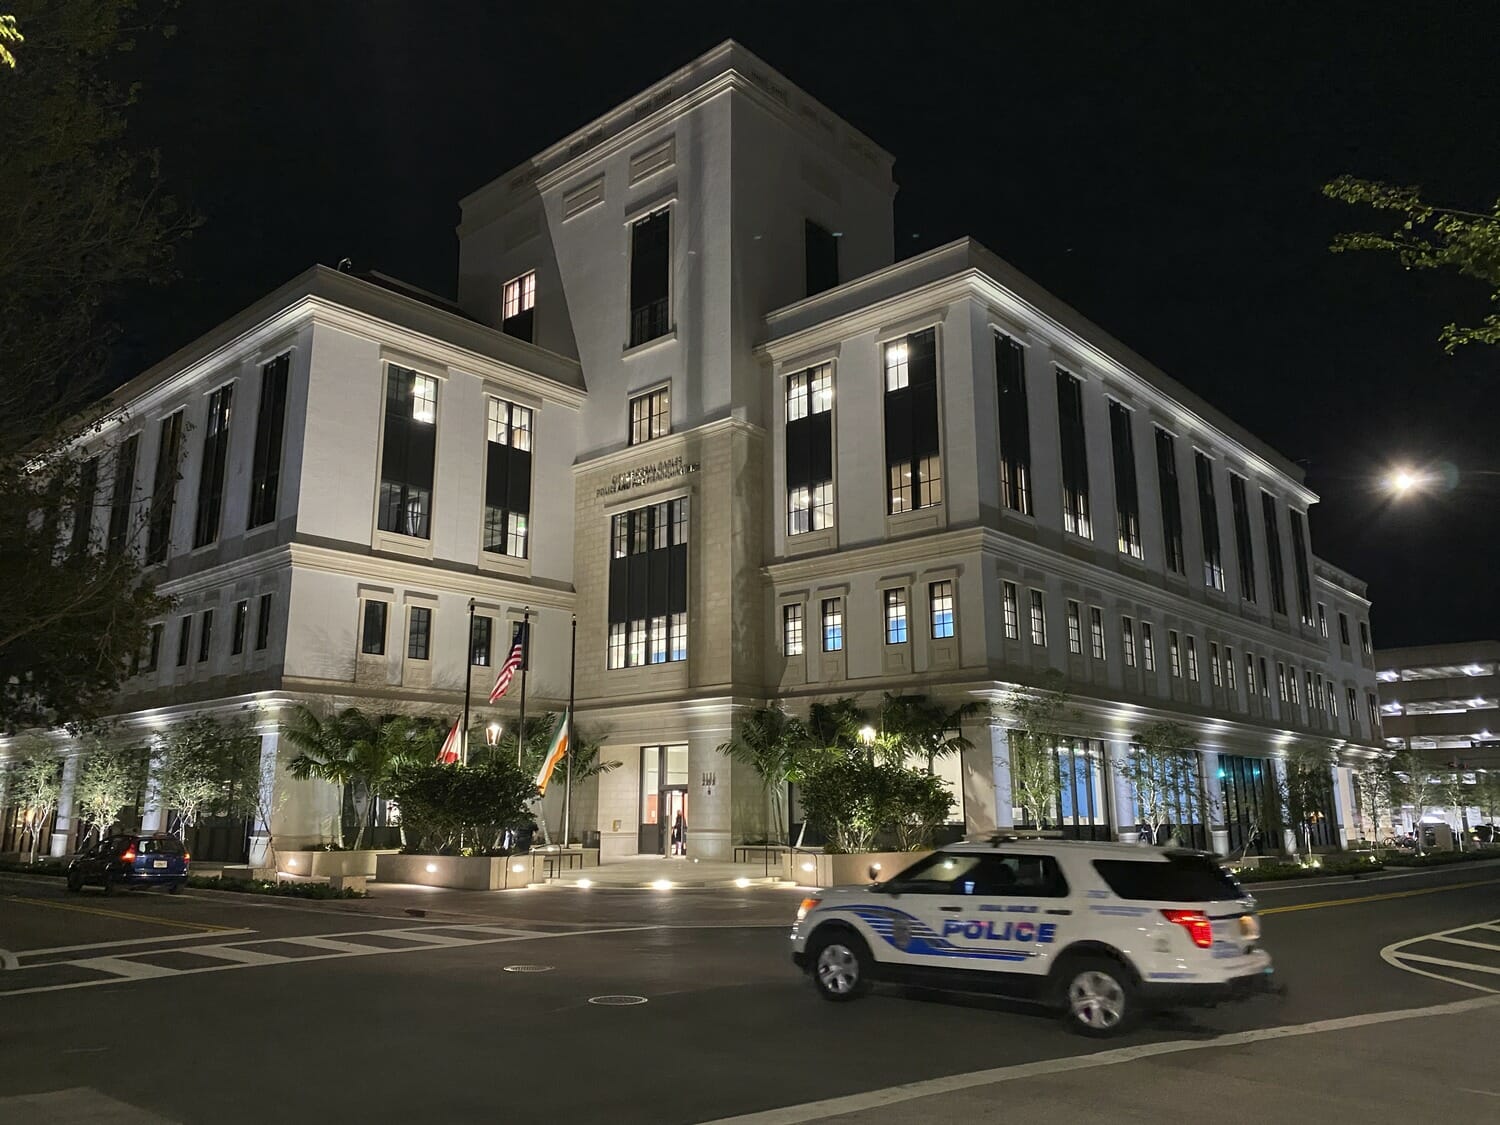 A police car is parked in front of a building at night.